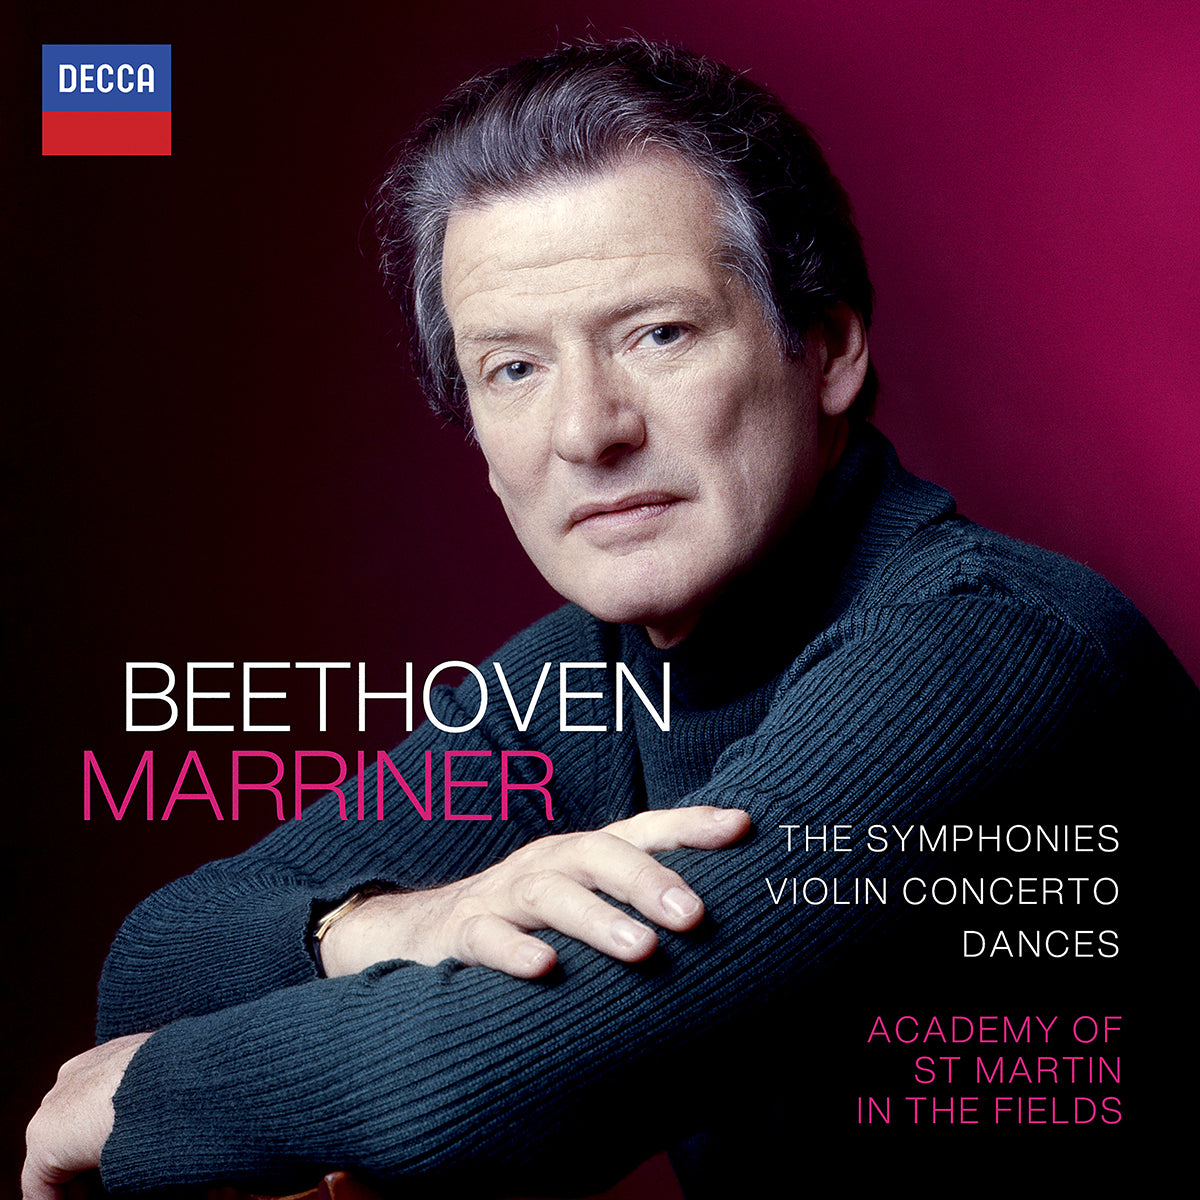 Sir Neville Marriner & Academy of St Martin in the Fields - .Marriner Conducts Beethoven: 10CD Boxset